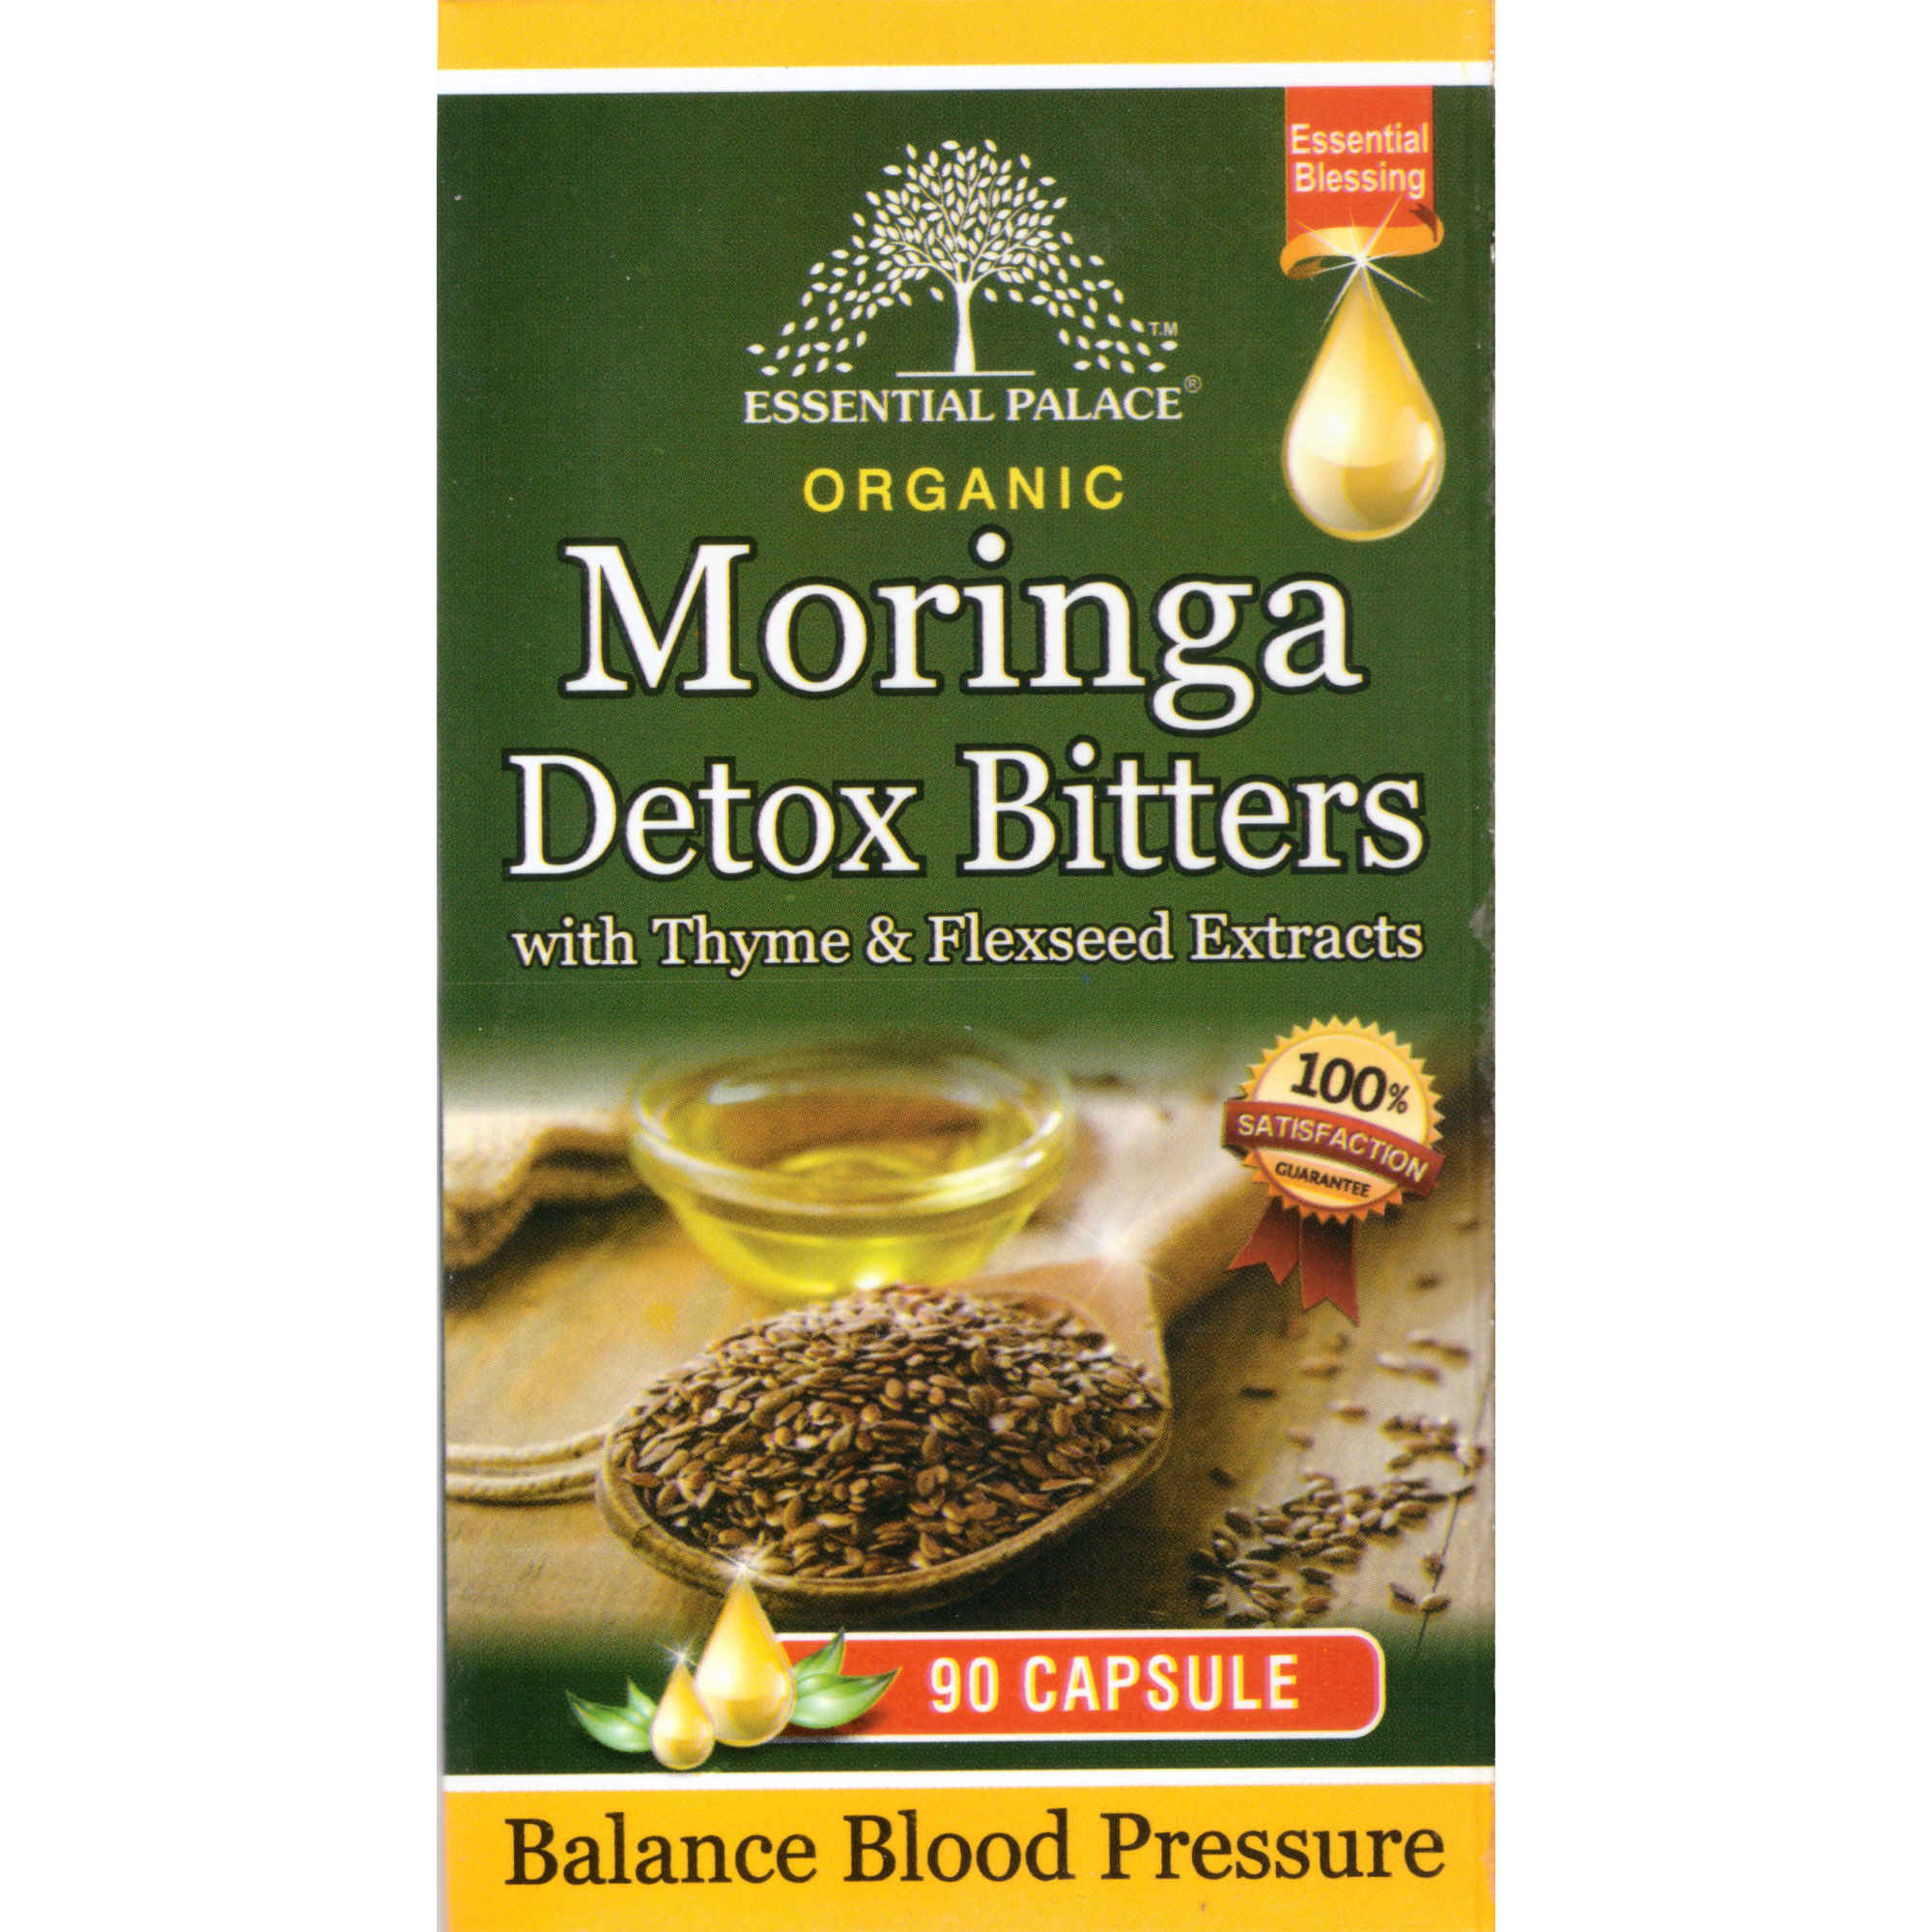 Essential Palace Moringa Detox Bitters Capsules 90 Count Front 2